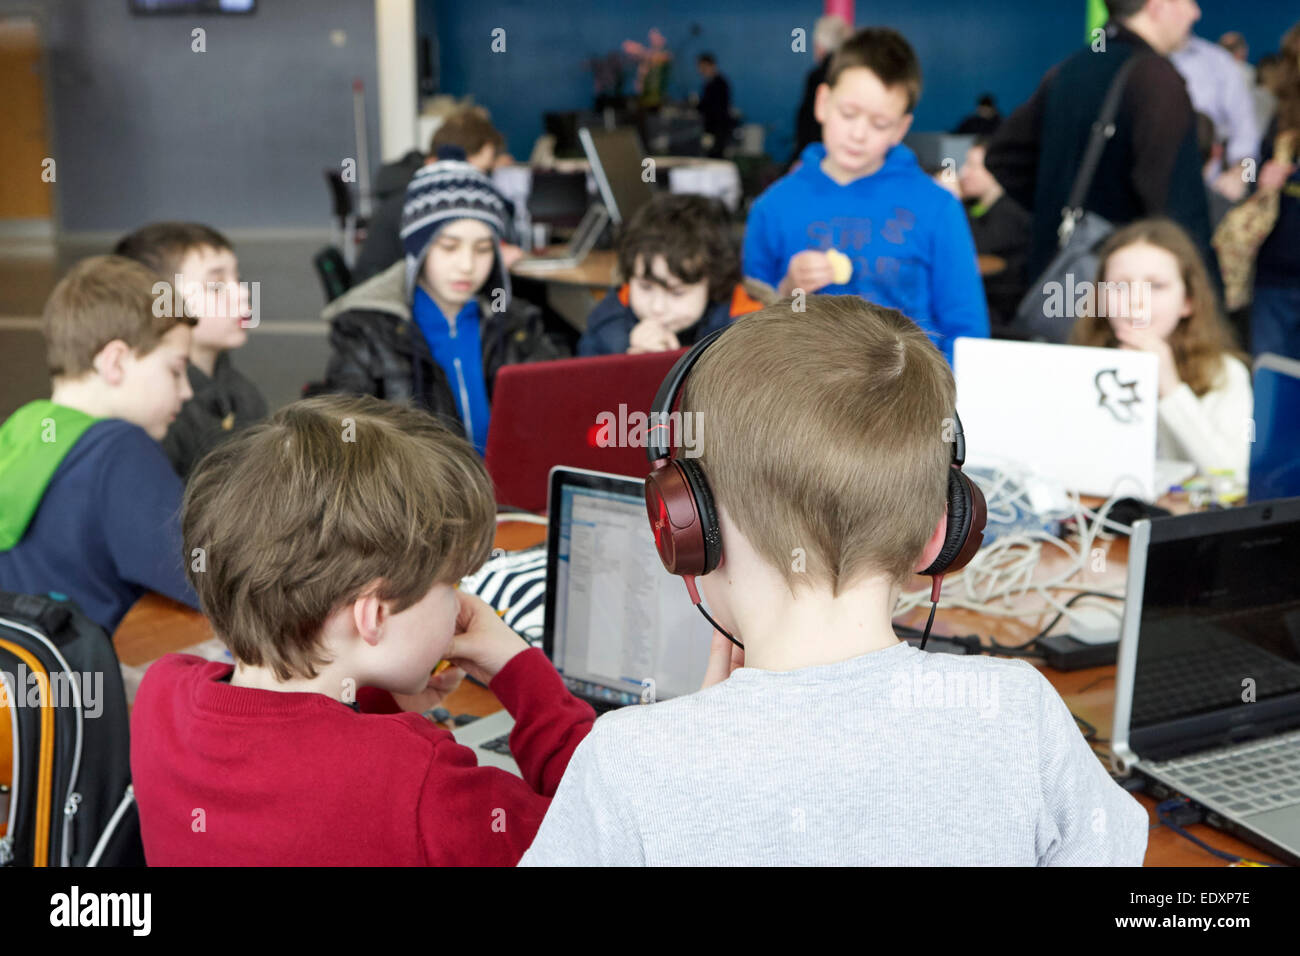 children attending a coderdojo event in the uk Stock Photo